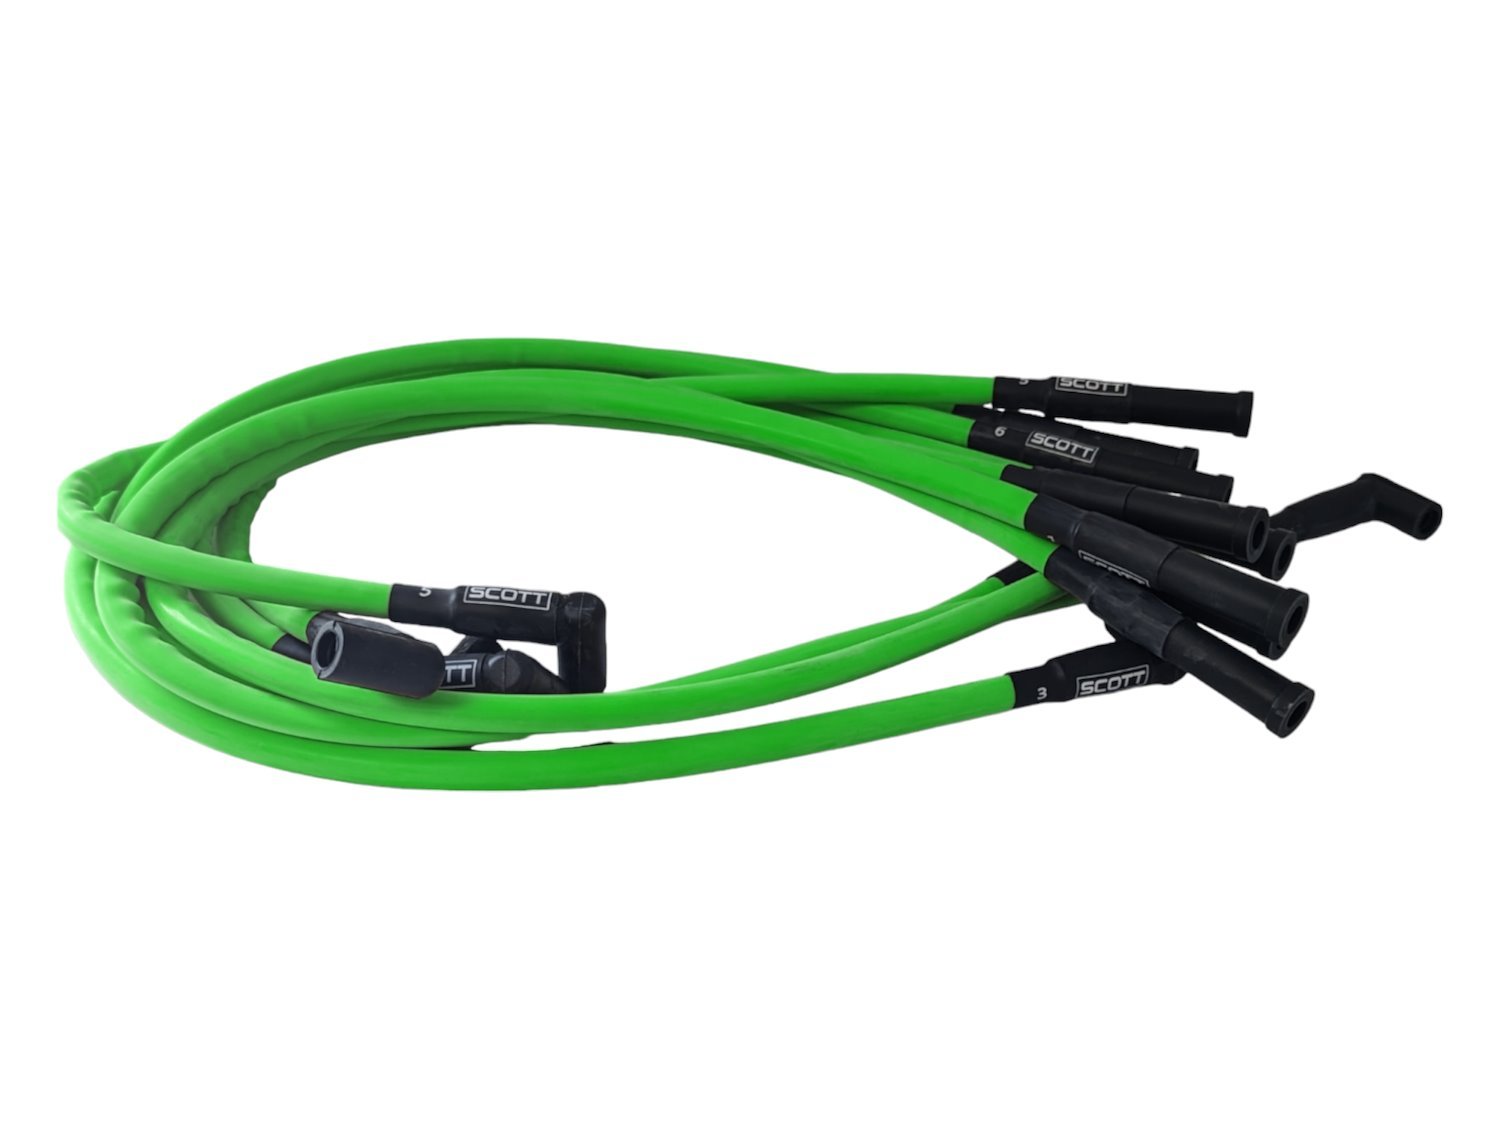 SPW300-CH-660-8 Super Mag Fiberglass-Oversleeved Spark Plug Wire Set for Small Block Dodge [Fluorescent Green]